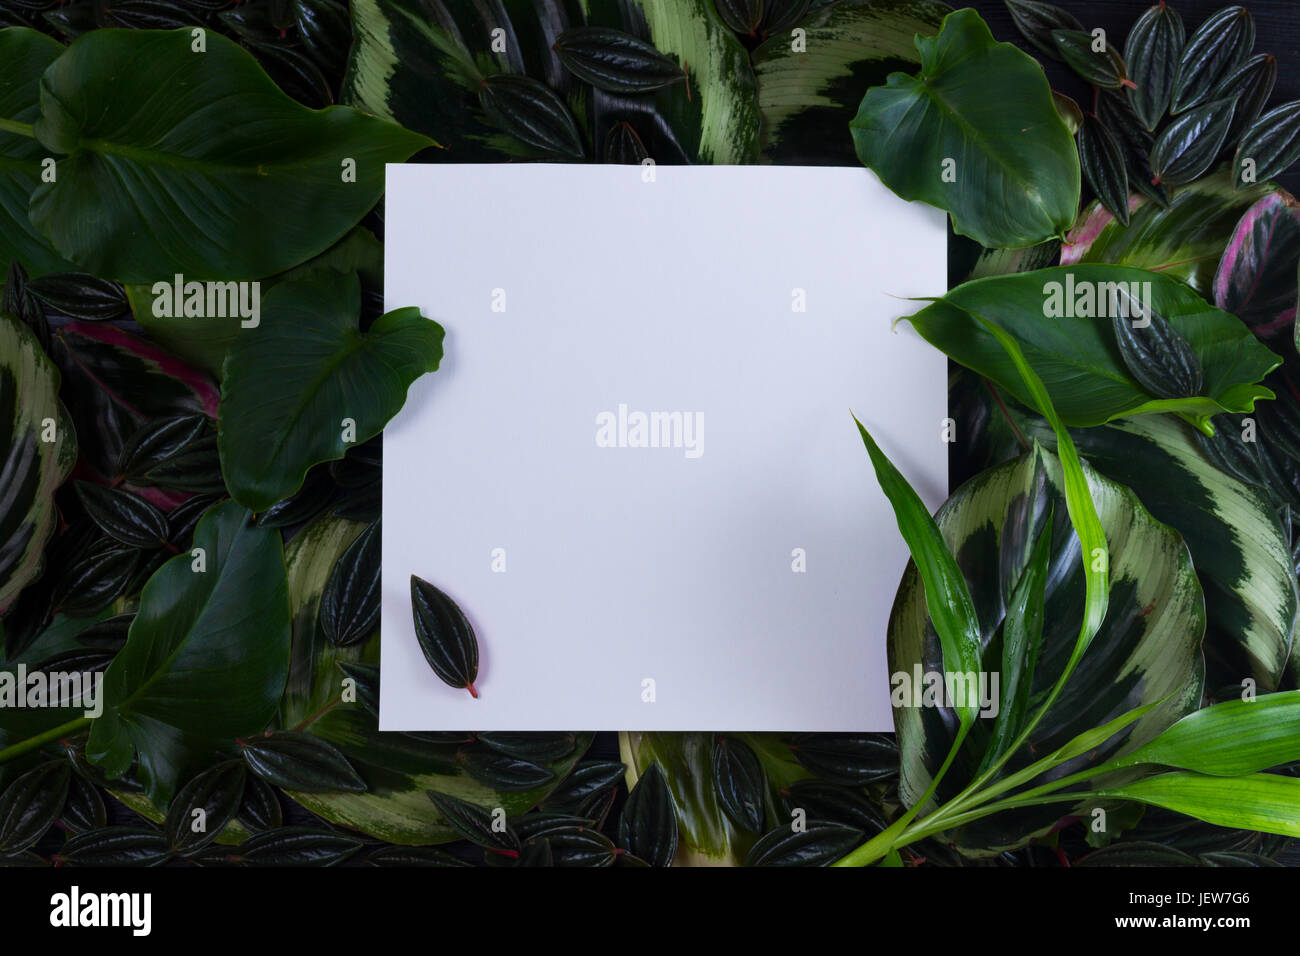 fresh green exotic leaves frame with copy space on empty paper note Stock Photo